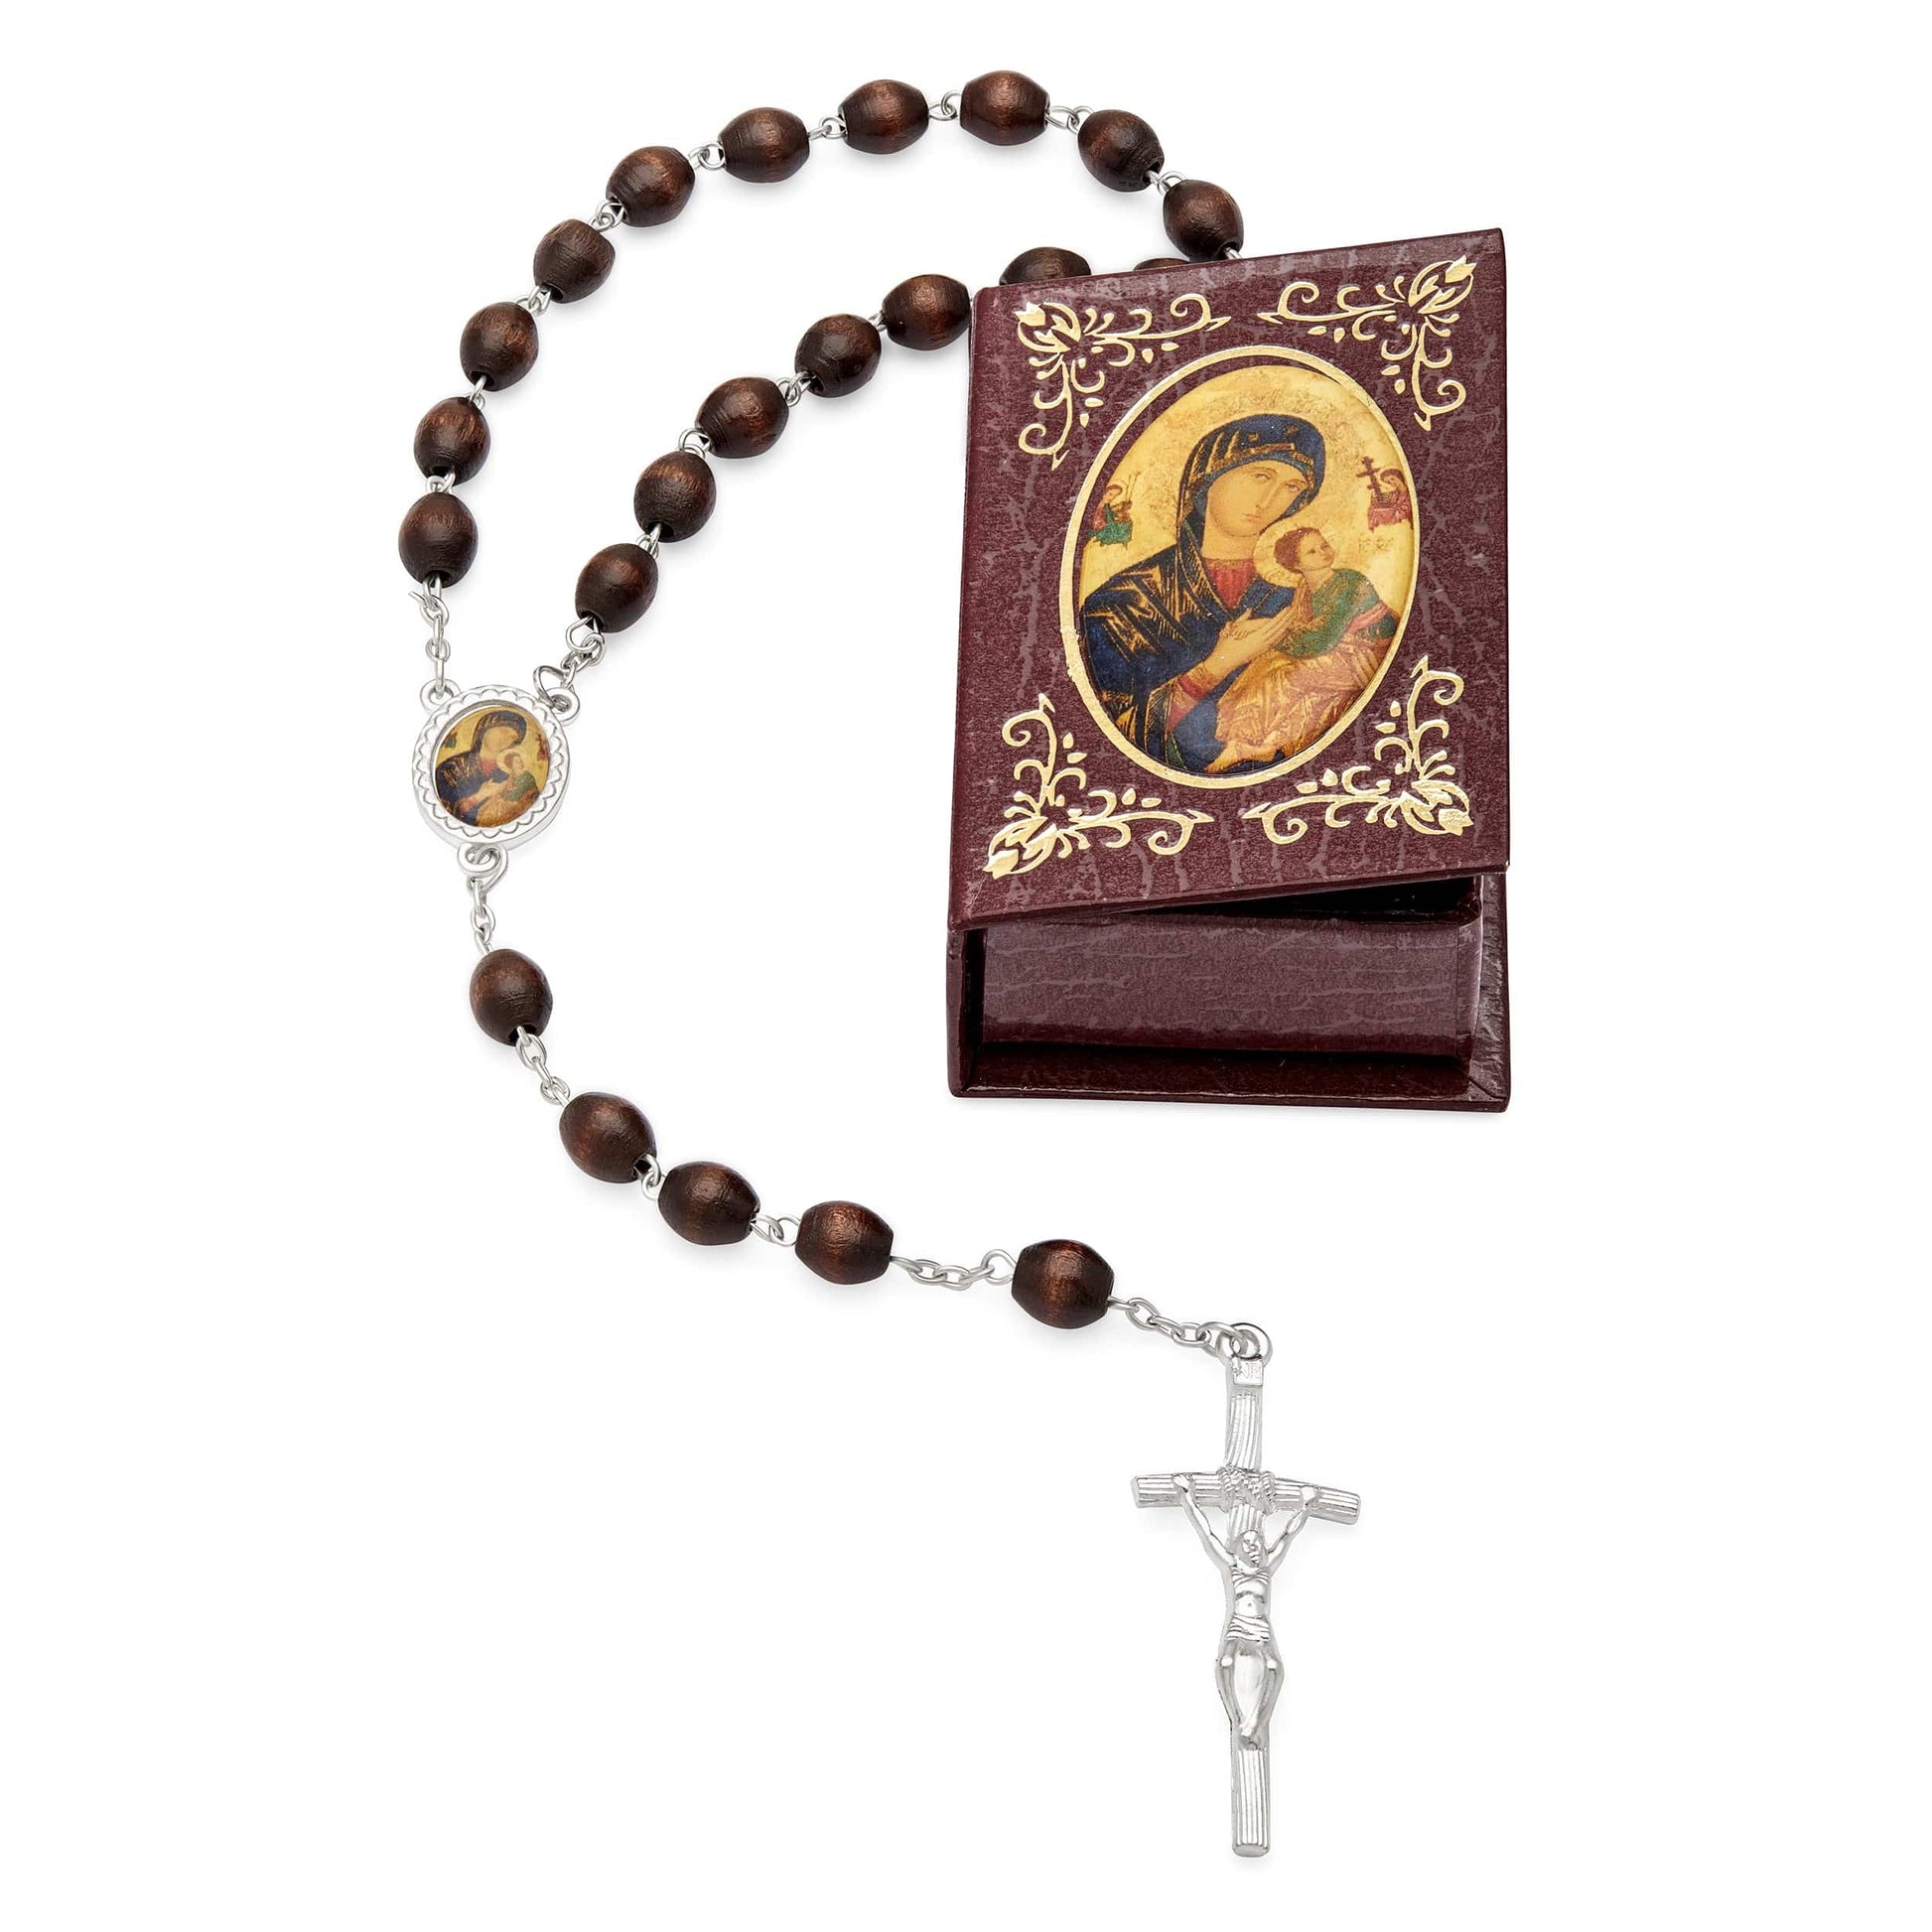 MONDO CATTOLICO Prayer Beads 53 cm (20.90 in) / 7 mm (0.3 in) Our Mother of Perpetual Help Rosary and brown box